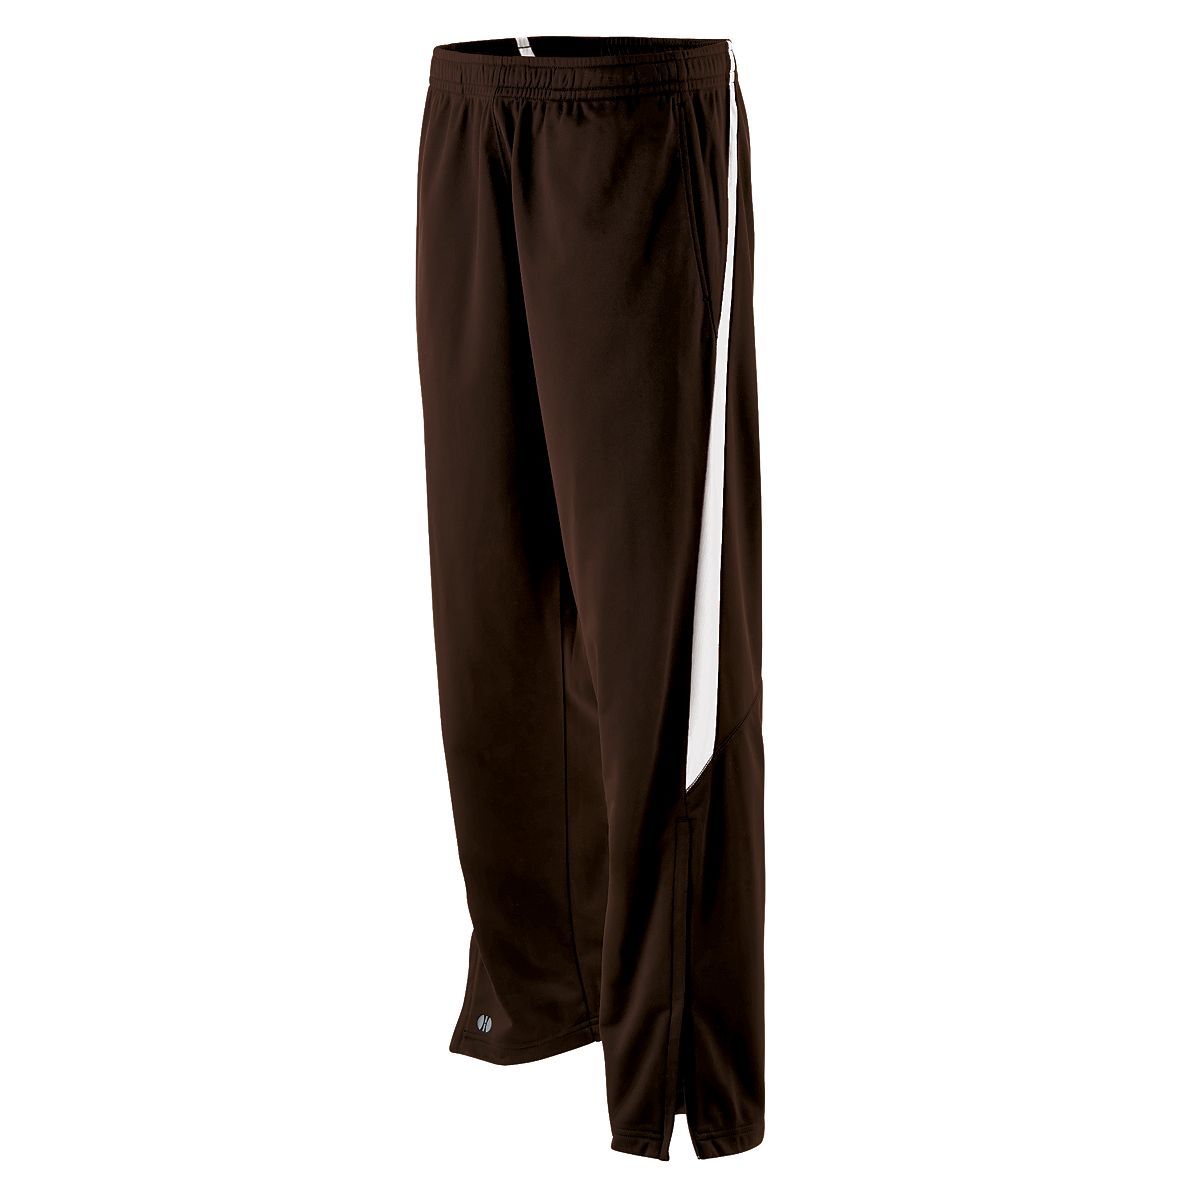 Holloway Youth Determination Pant in Brown/White  -Part of the Youth, Youth-Pants, Pants, Holloway product lines at KanaleyCreations.com